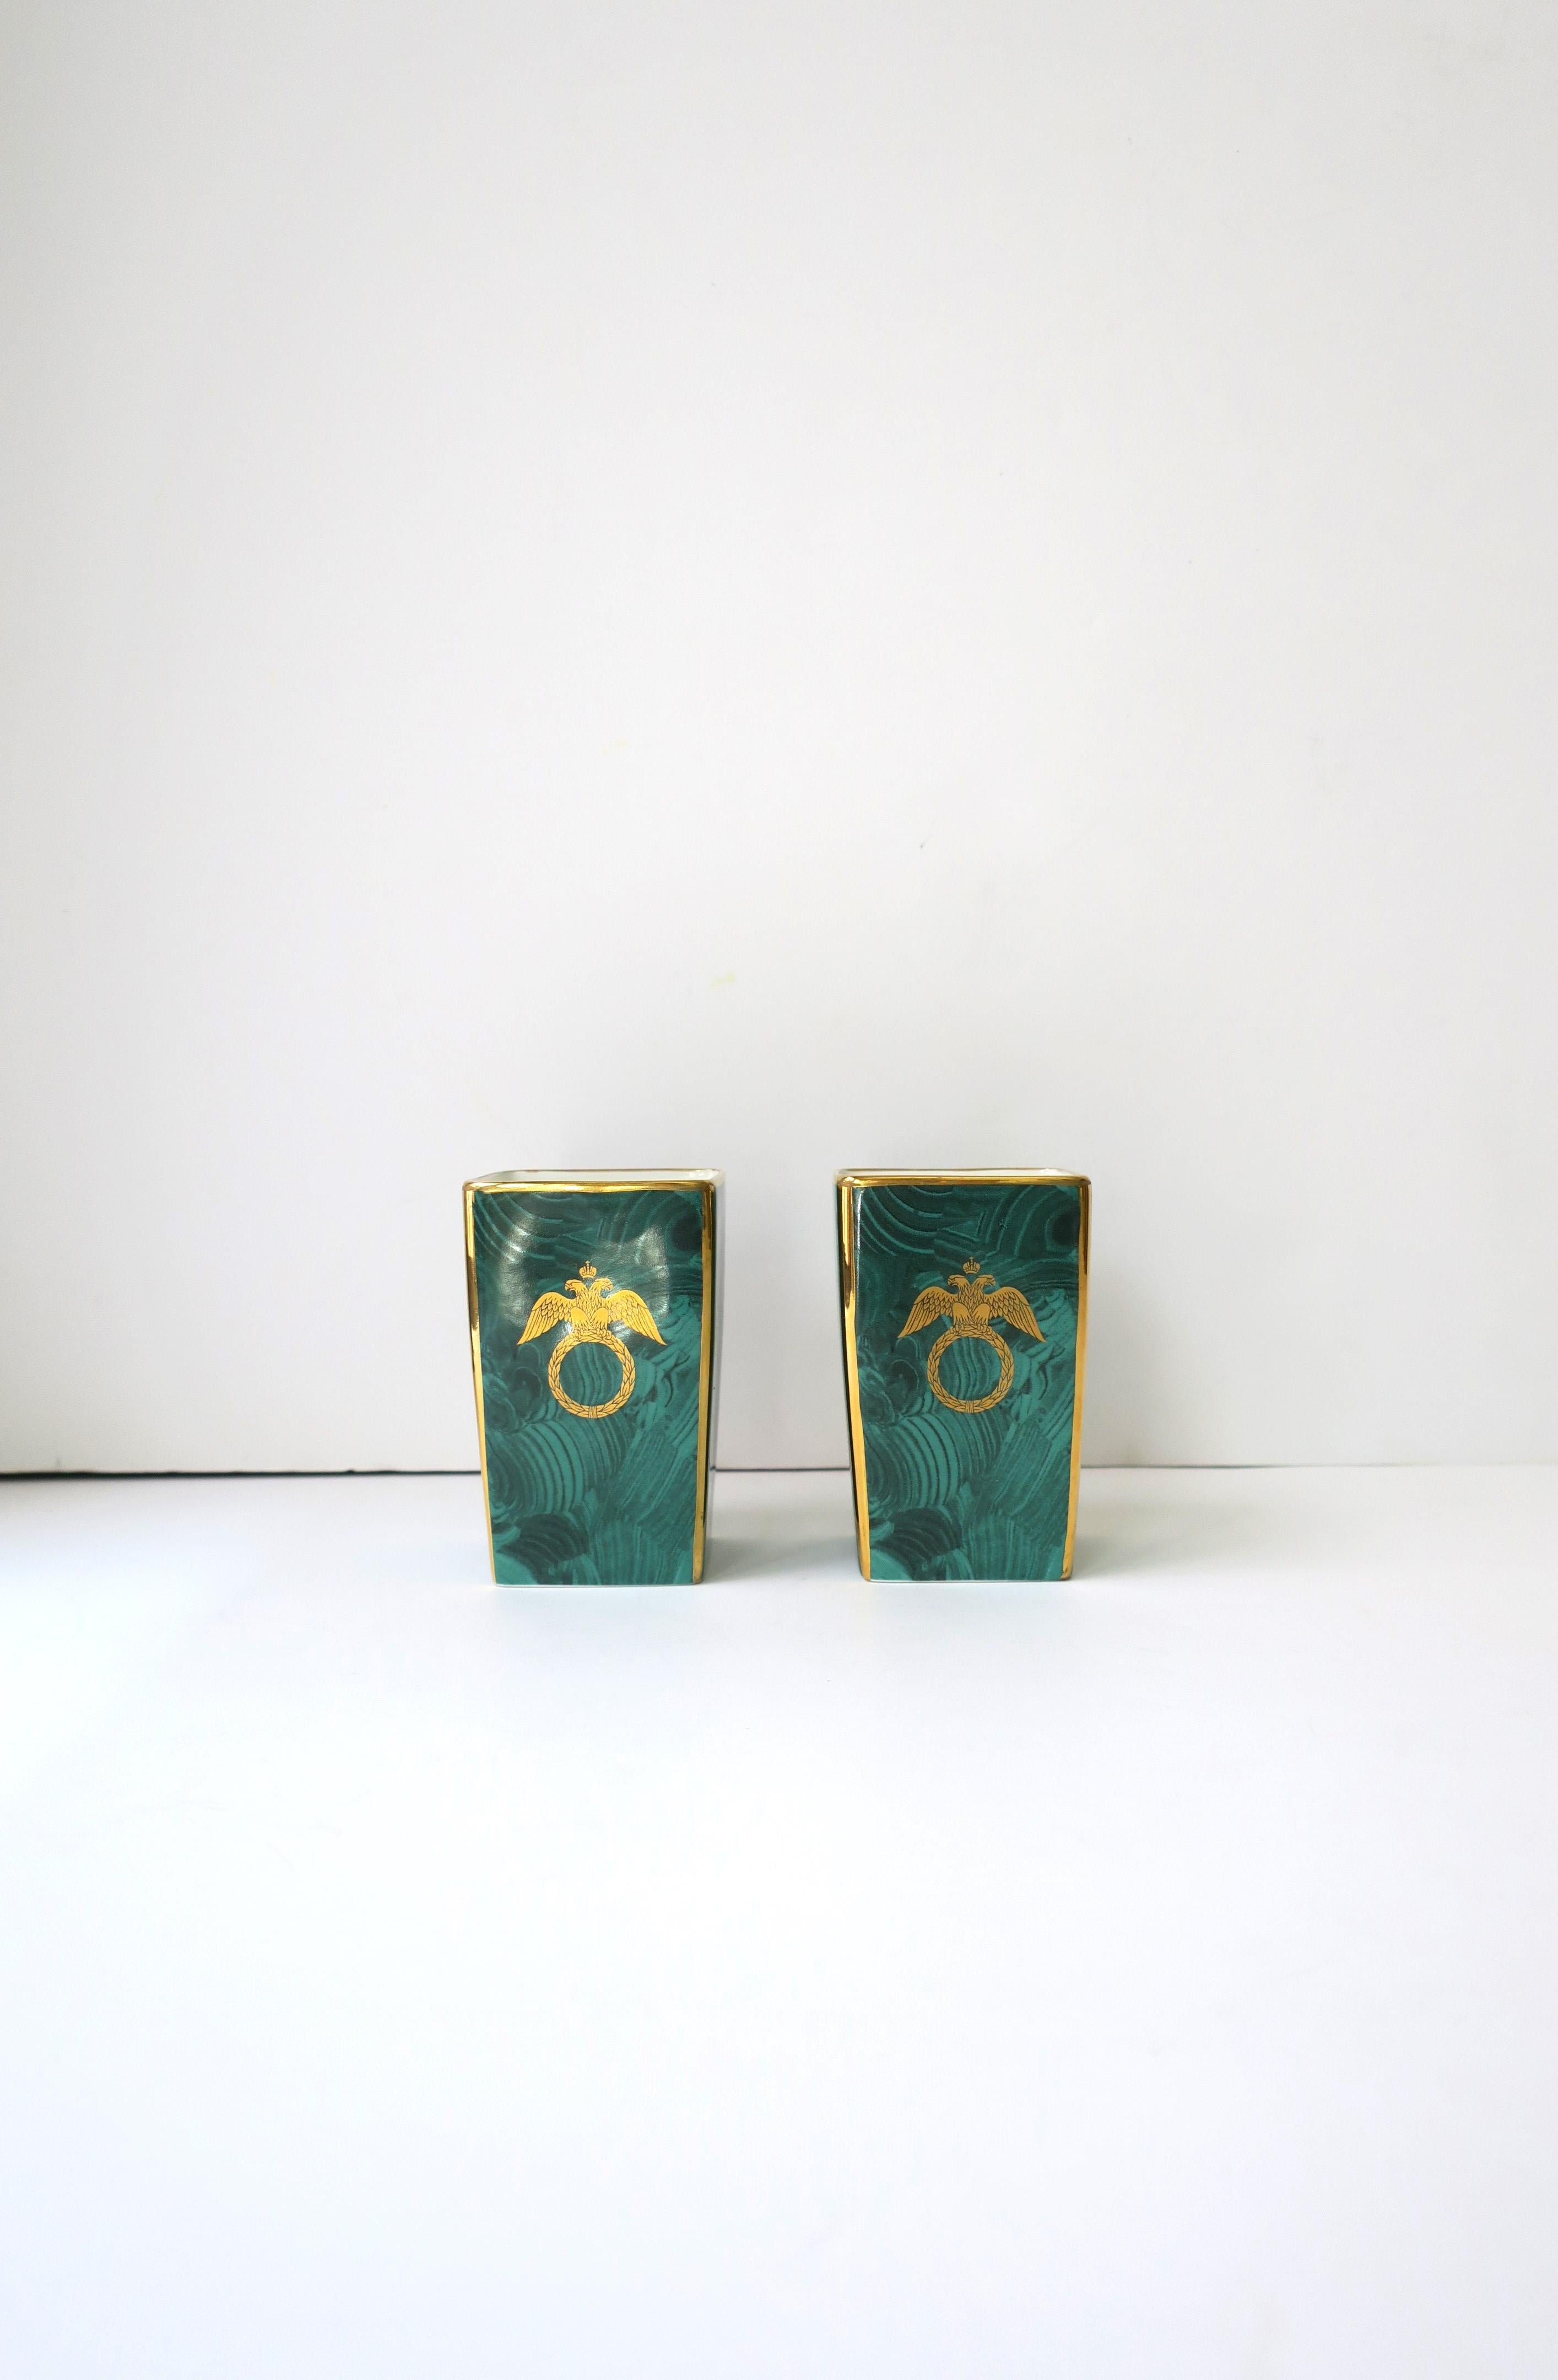 English Malachite and Gold Porcelain Desk Pen or Vanity Holders, or Vases, England, Pair